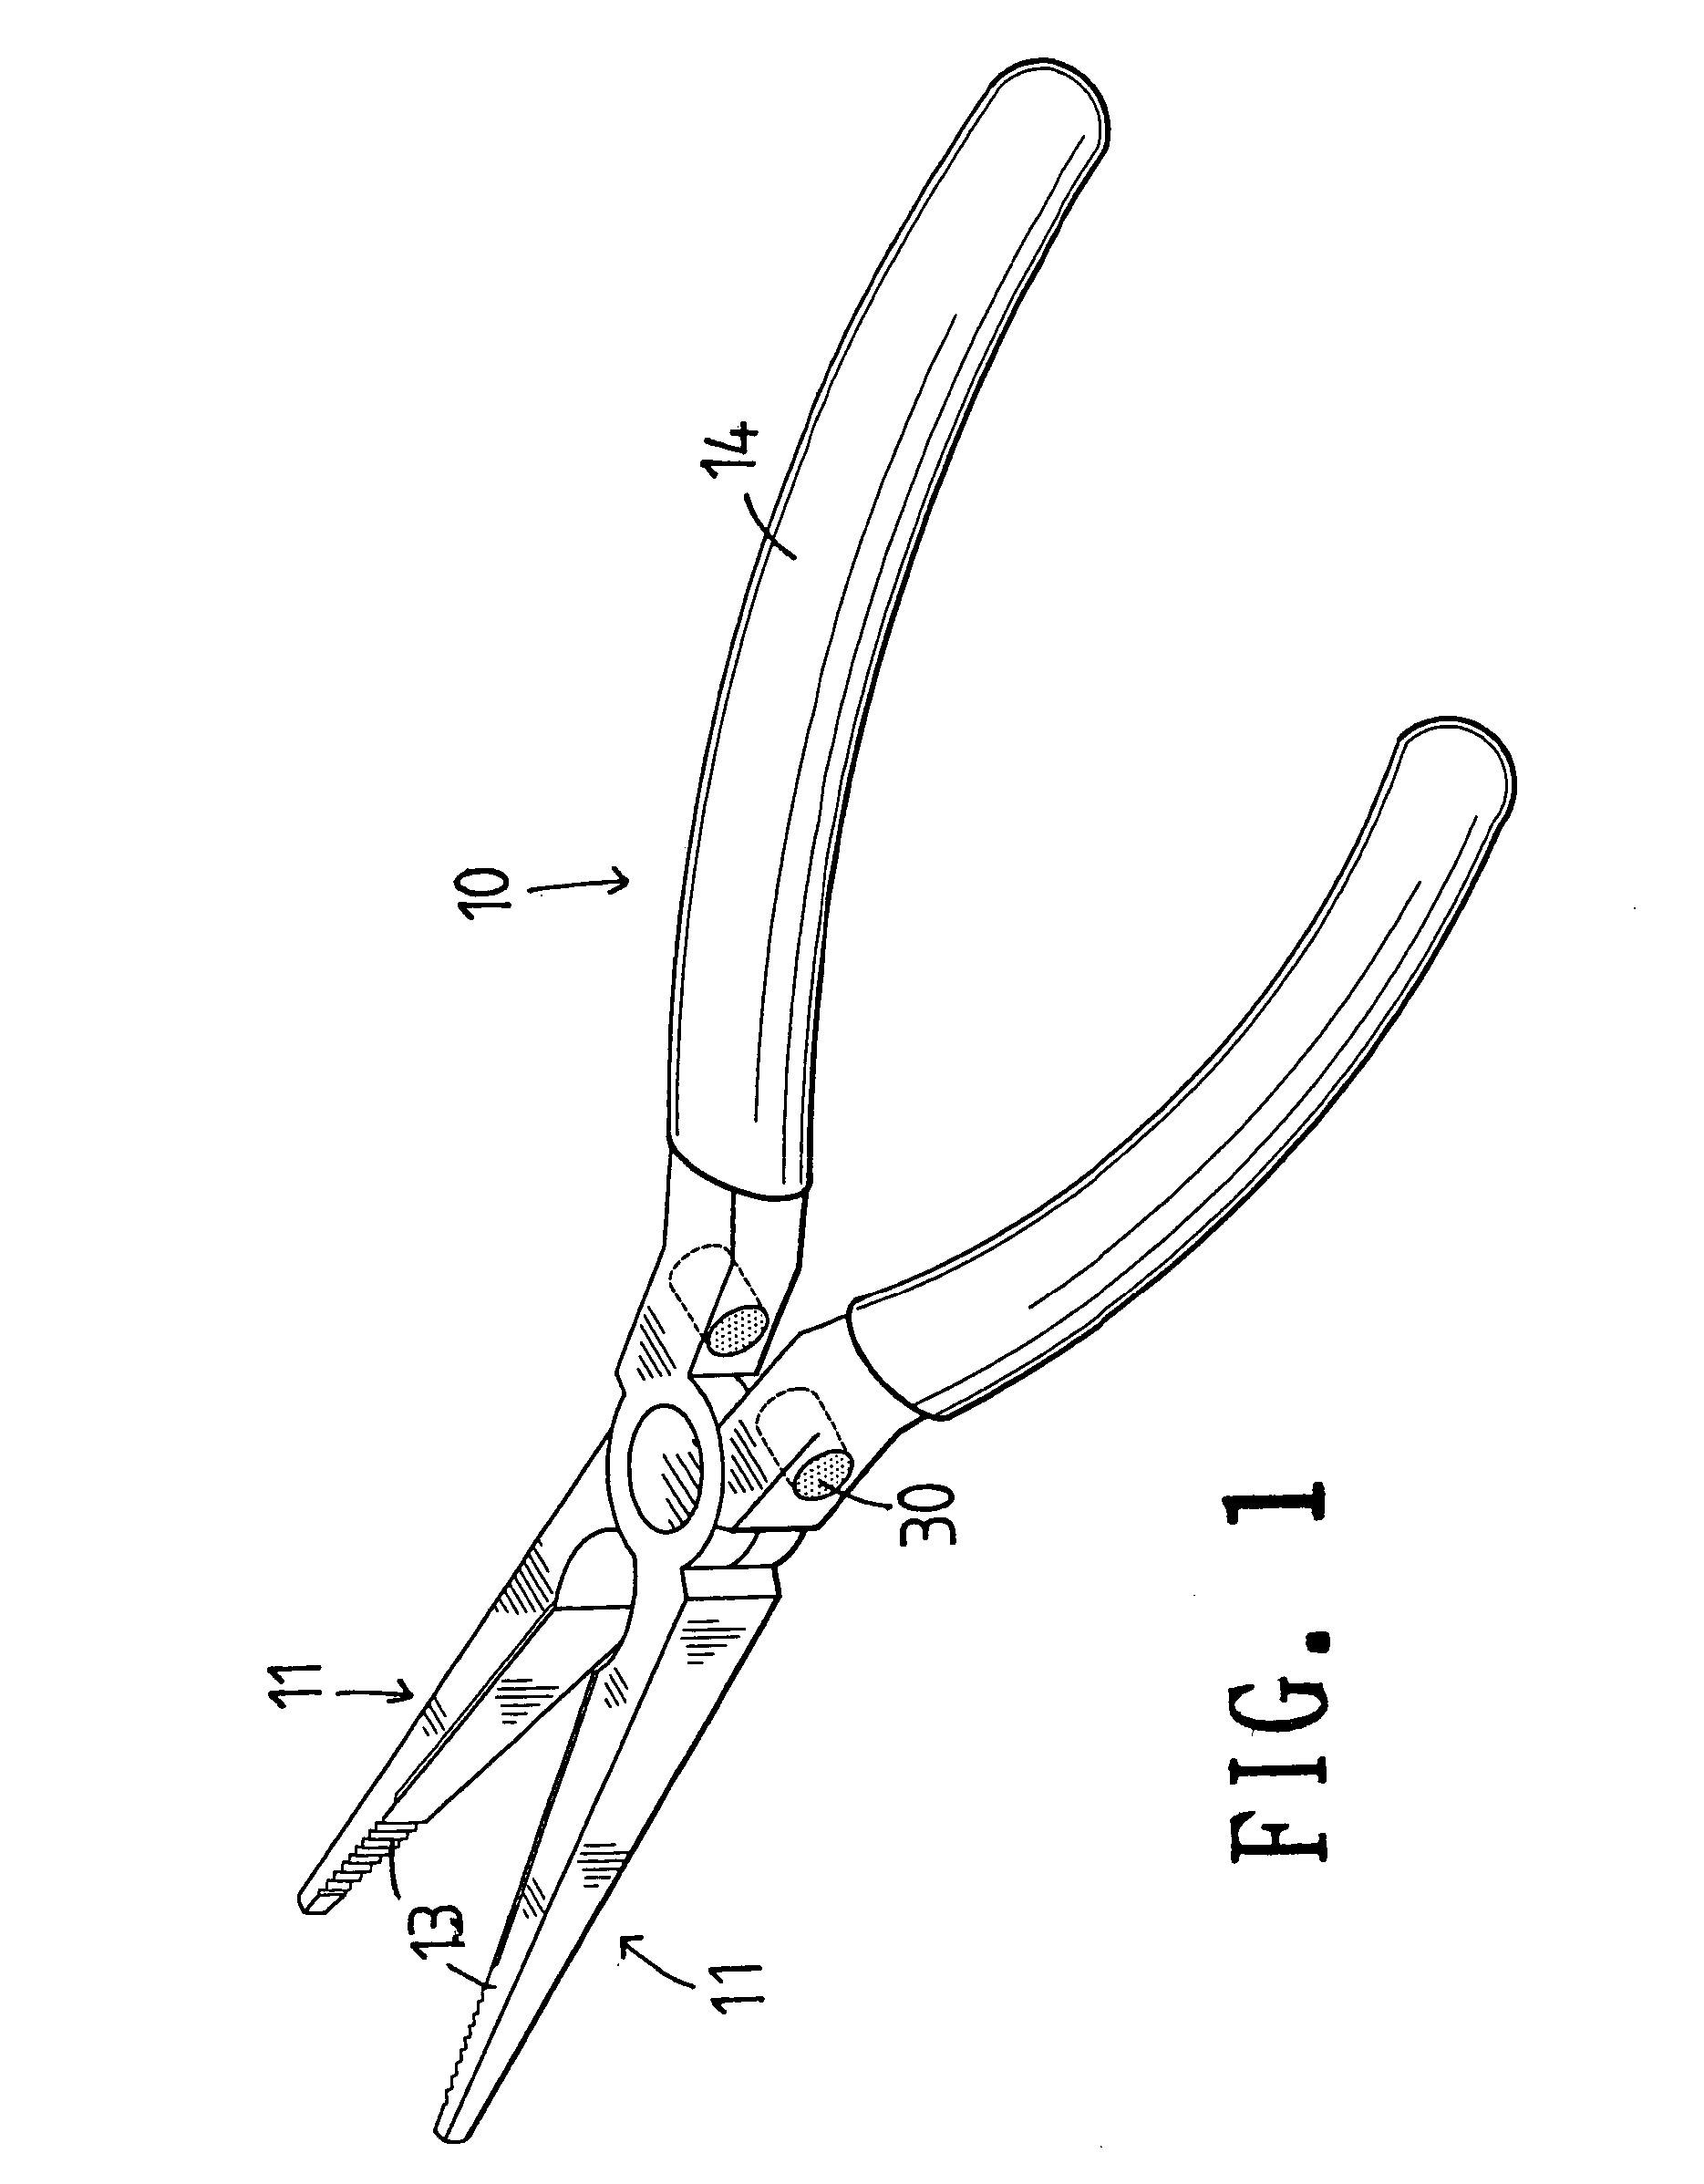 Hand tool having an extendable handle structure